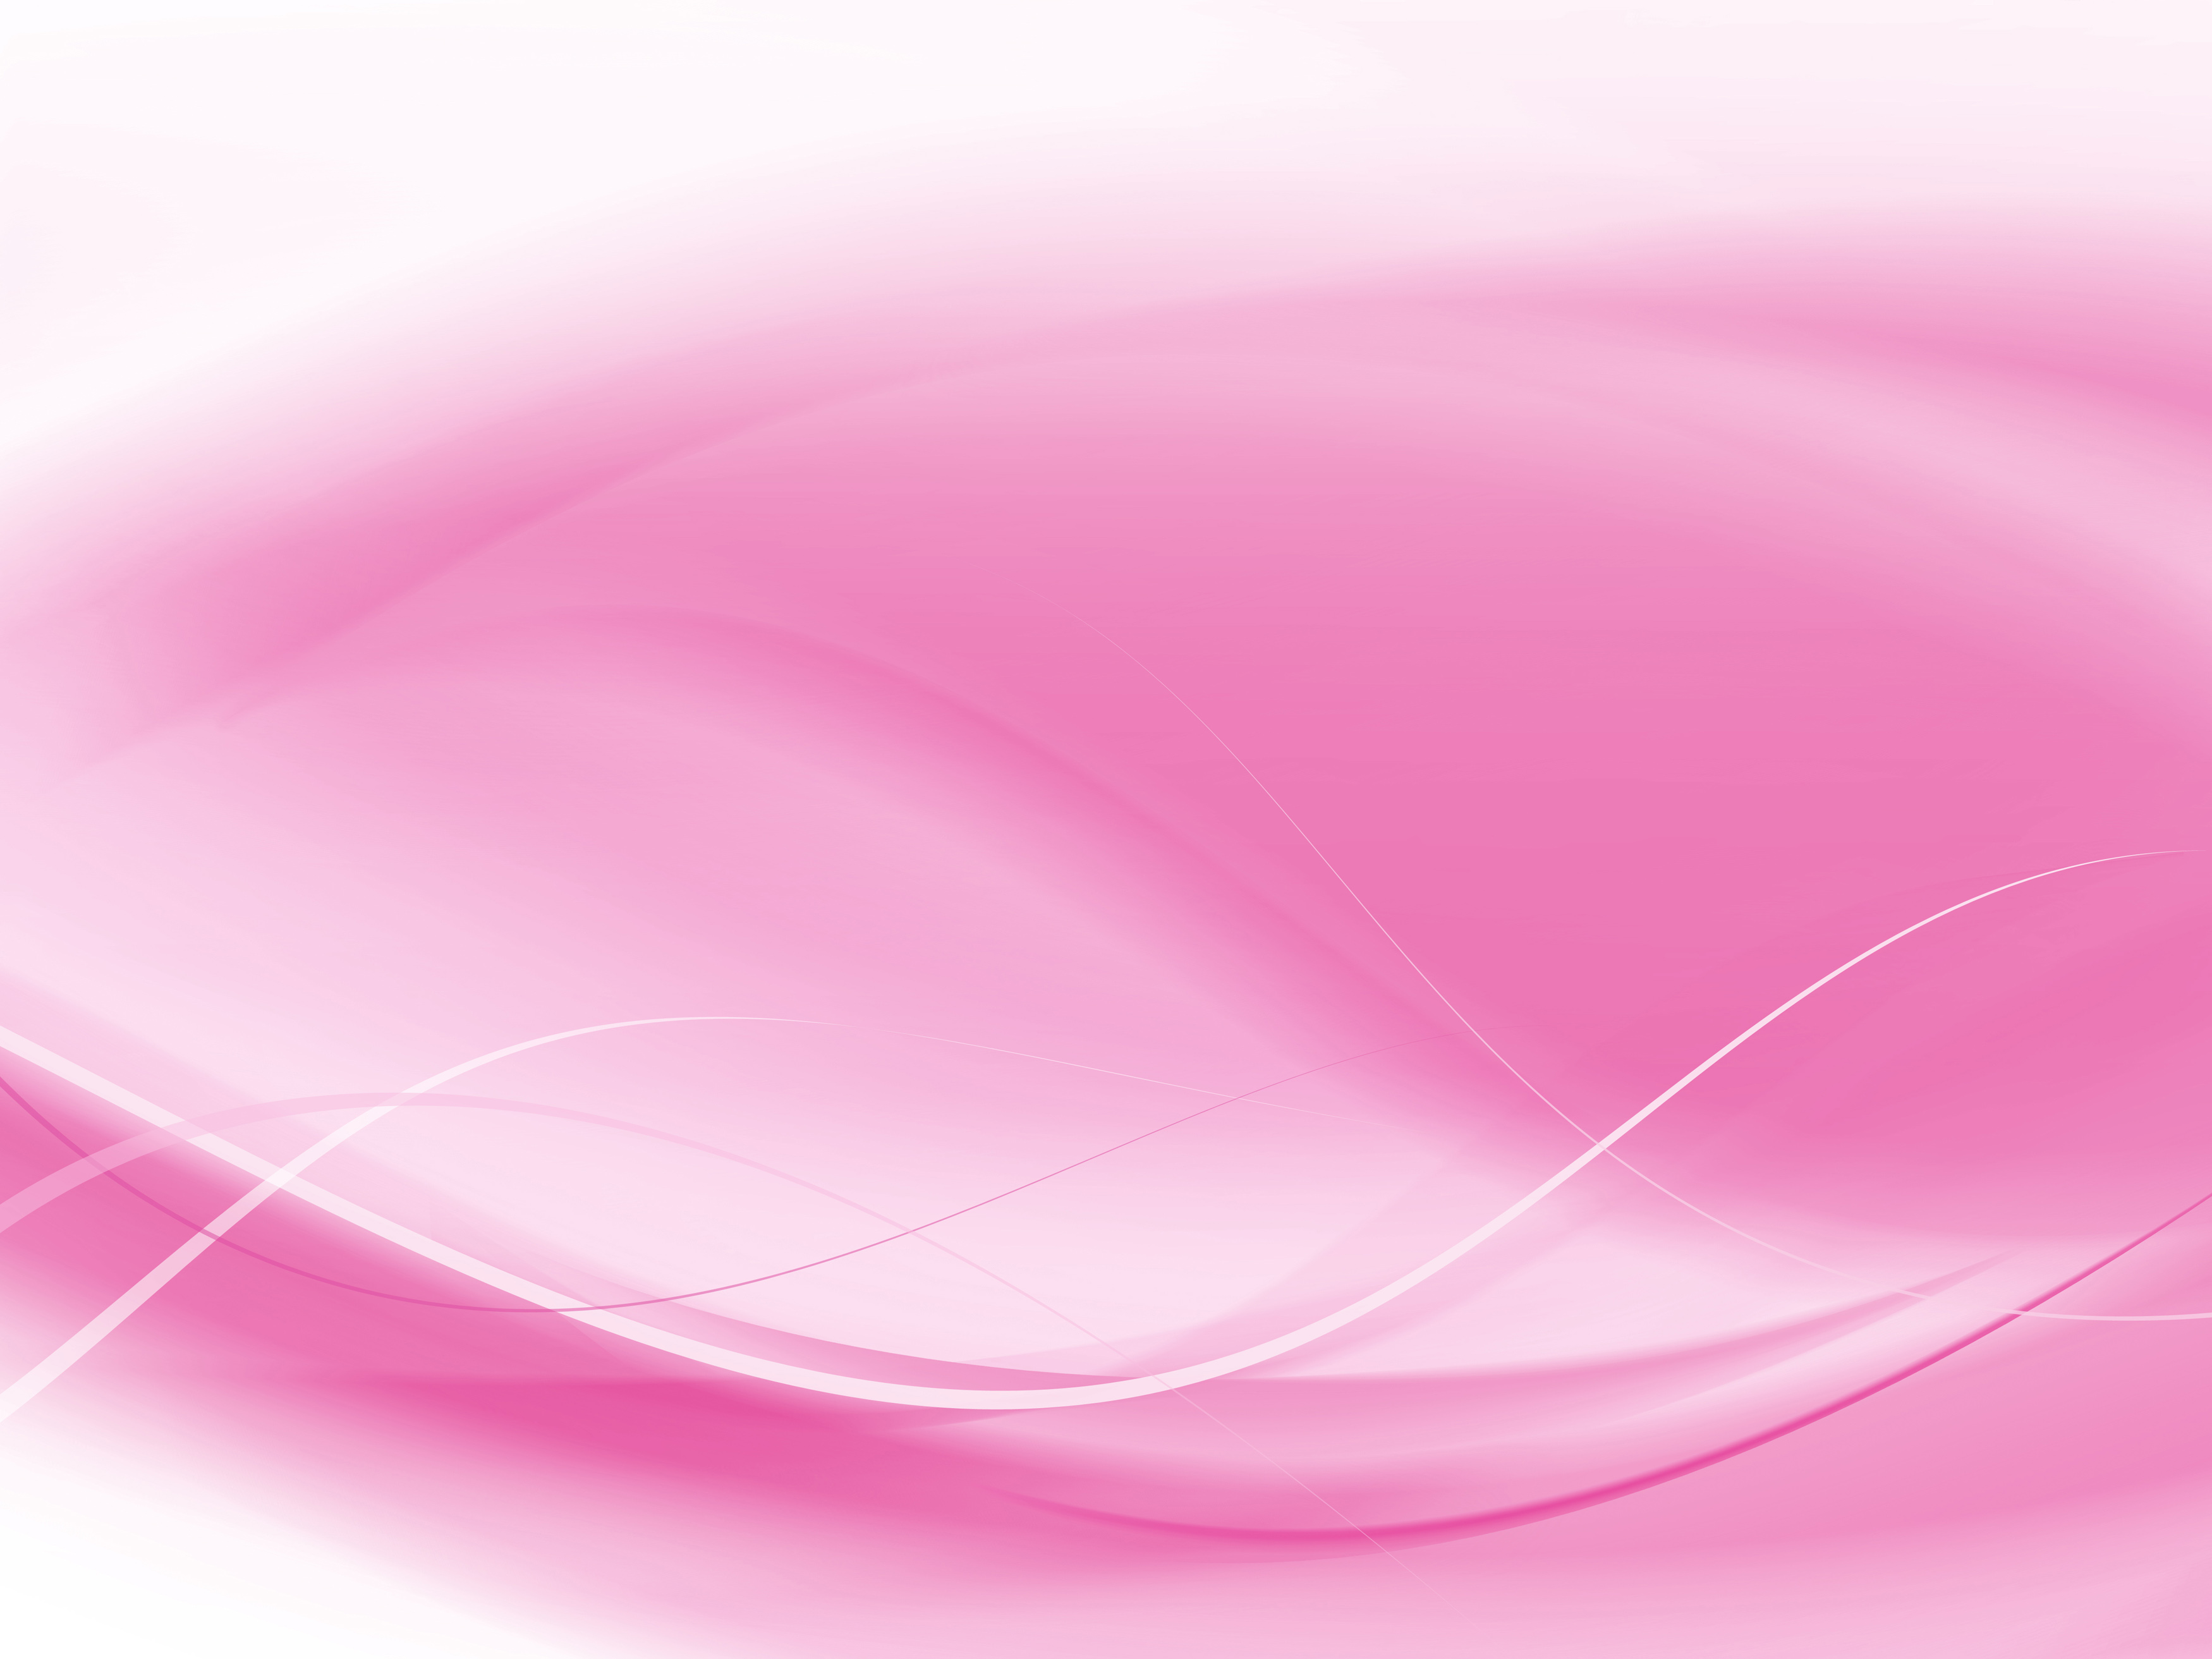 Free Photoshop Backgrounds Pink